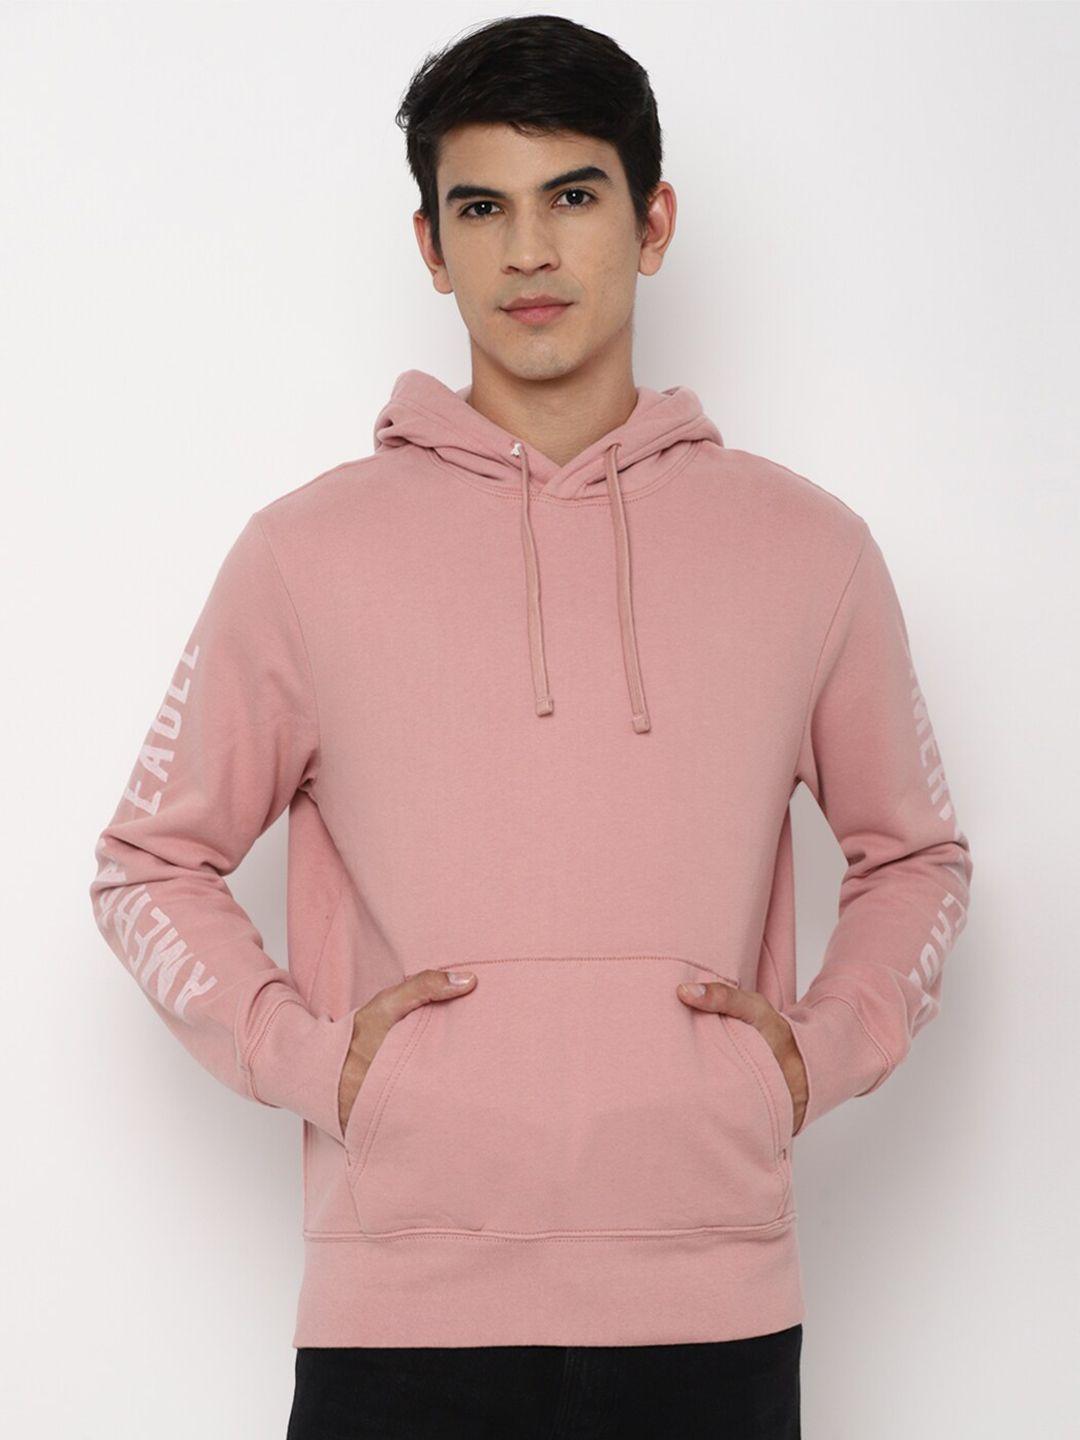 american eagle outfitters men peach solid hooded sweatshirt